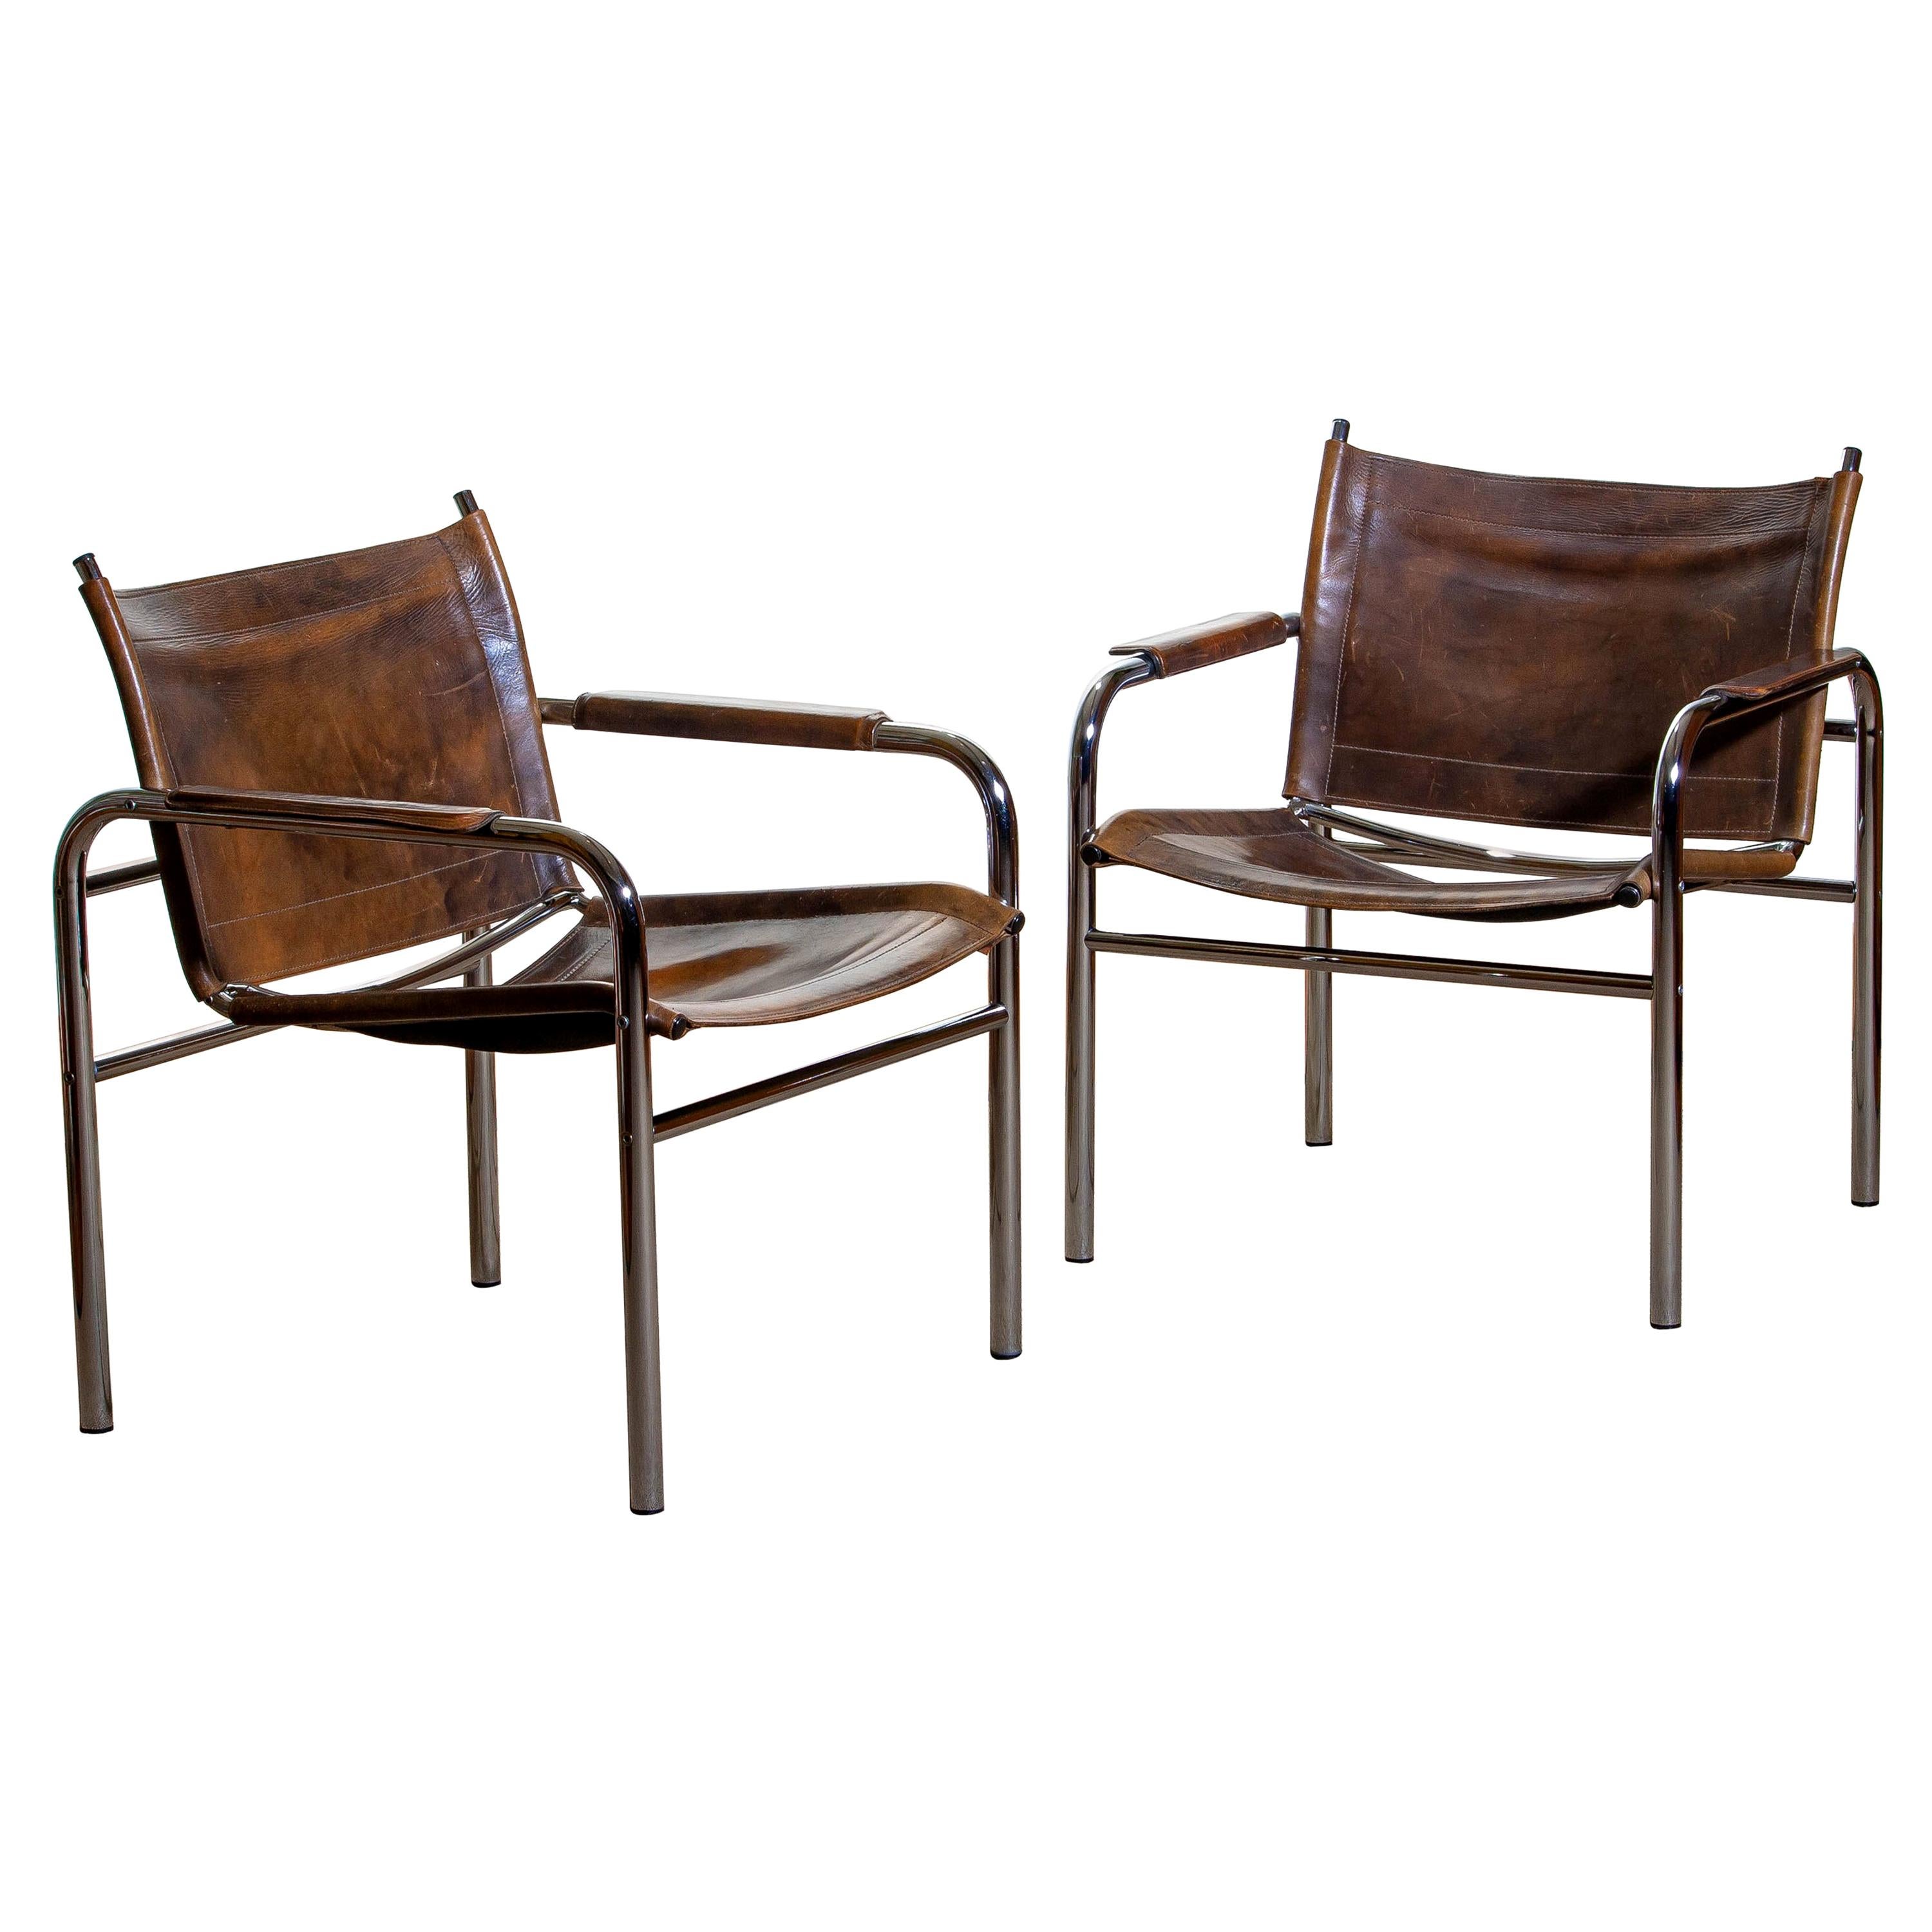 1980s, Pair of Leather and Tubular Steel Armchairs by Tord Bjorklund, Sweden